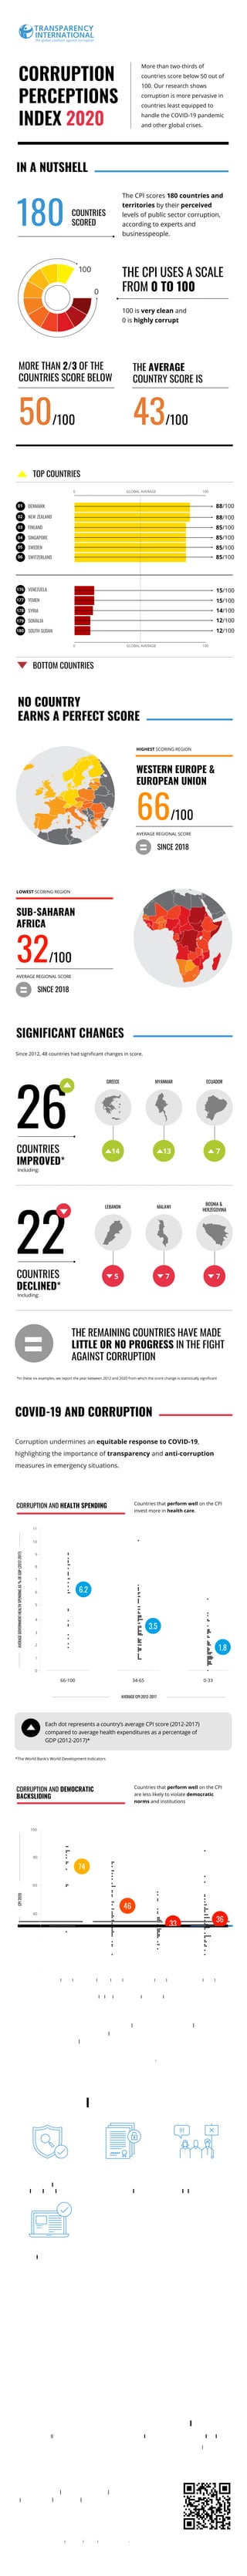 CORRUPTION
PERCEPTIONS
INDEX 2020
IN A NUTSHELL
The CPI scores 180 countries and
territories by their perceived
levels of public sector corruption,
according to experts and
businesspeople.
THE CPI USES A SCALE
FROM 0 TO 100
100 is very clean and
0 is highly corrupt
180 COUNTRIES
SCORED
50/100
MORE THAN 2/3 OF THE
COUNTRIES SCORE BELOW
43/100
THE AVERAGE
COUNTRY SCORE IS
NO COUNTRY
EARNS A PERFECT SCORE
=
66/100
WESTERN EUROPE &
EUROPEAN UNION
HIGHEST SCORING REGION
AVERAGE REGIONAL SCORE
SINCE 2018
=
32/100
SUB-SAHARAN
AFRICA
LOWEST SCORING REGION
AVERAGE REGIONAL SCORE
SINCE 2018
AVERAGE REGIONAL SCORE
More than two-thirds of
countries score below 50 out of
100. Our research shows
corruption is more pervasive in
countries least equipped to
handle the COVID-19 pandemic
and other global crises.
26
COUNTRIES
IMPROVED*
Including:
GREECE
14
MYANMAR
13
ECUADOR
7
22
COUNTRIES
DECLINED*
Including:
LEBANON
5
MALAWI
7
BOSNIA &
HERZEGOVINA
7
=
THE REMAINING COUNTRIES HAVE MADE
LITTLE OR NO PROGRESS IN THE FIGHT
AGAINST CORRUPTION
*In these six examples, we report the year between 2012 and 2020 from which the score change is statistically significant
COVID-19 AND CORRUPTION
Corruption undermines an equitable response to COVID-19,
highlighting the importance of transparency and anti-corruption
measures in emergency situations.
CORRUPTION AND DEMOCRATIC
BACKSLIDING
*Pandemic Violations of Democratic Standards Index, Varieties of Democracy (V-DEM) 2020
Each dot represents a country’s CPI 2020 score, and the circles
represent the average CPI score as compared to the average
pandemic violation*
GLOBAL AVERAGE
TOP COUNTRIES
DENMARK
NEW ZEALAND
FINLAND
SINGAPORE
SWITZERLAND
06
04
03
02
01
VENEZUELA
YEMEN
SYRIA
SOMALIA
SOUTH SUDAN
180
179
178
177
176
88/100
88/100
85/100
85/100
85/100
15/100
15/100
14/100
12/100
12/100
BOTTOM COUNTRIES
100
0
GLOBAL AVERAGE 100
0
SWEDEN
05 85/100
WHAT YOU CAN DO
This work from Transparency International (2020) is licensed under CC BY-ND 4.0
GET INVOLVED
Read the full report on
transparency.org/cpi/2020
RECOMMENDATIONS
Speak out on social
media
GET THE FACTS SPREAD THE WORD
Contact your local
chapter to see how you
can help
Through chapters in more than 100 countries and
an international secretariat in Berlin, Transparency
International has been leading the fight against
corruption for more than 25 years.
Join our efforts at transparency.org
DEFEND DEMOCRACY,
PROMOTE
CIVIC SPACE
PUBLISH RELEVANT
DATA,
GUARANTEE ACCESS
ENSURE OPEN AND
TRANSPARENT
CONTRACTING
SIGNIFICANT CHANGES
Since 2012, 48 countries had significant changes in score.
STRENGTHEN
OVERSIGHT
INSTITUTIONS
CPI
2020
MAJOR VIOLATIONS
NO VIOLATIONS MINOR VIOLATIONS
PANDEMIC VIOLATIONS OF DEMOCRATIC STANDARDS INDEX (PanDem)
100
0
20
40
60
80
36
Countries that perform well on the CPI
are less likely to violate democratic
norms and institutions
CORRUPTION AND HEALTH SPENDING
*The World Bank’s World Development Indicators
Each dot represents a country’s average CPI score (2012-2017)
compared to average health expenditures as a percentage of
GDP (2012-2017)*
AVERAGE
GOVERNMENT
HEALTH
SPENDING
AS
%
OF
GDP
(2012-2017)
0-33
66-100 34-65
AVERAGE CPI 2012-2017
11
0
1
2
3
4
5
6
7
8
9
10
1.8
6.2
3.5
Countries that perform well on the CPI
invest more in health care.
SOME VIOLATIONS
74
46
33
 